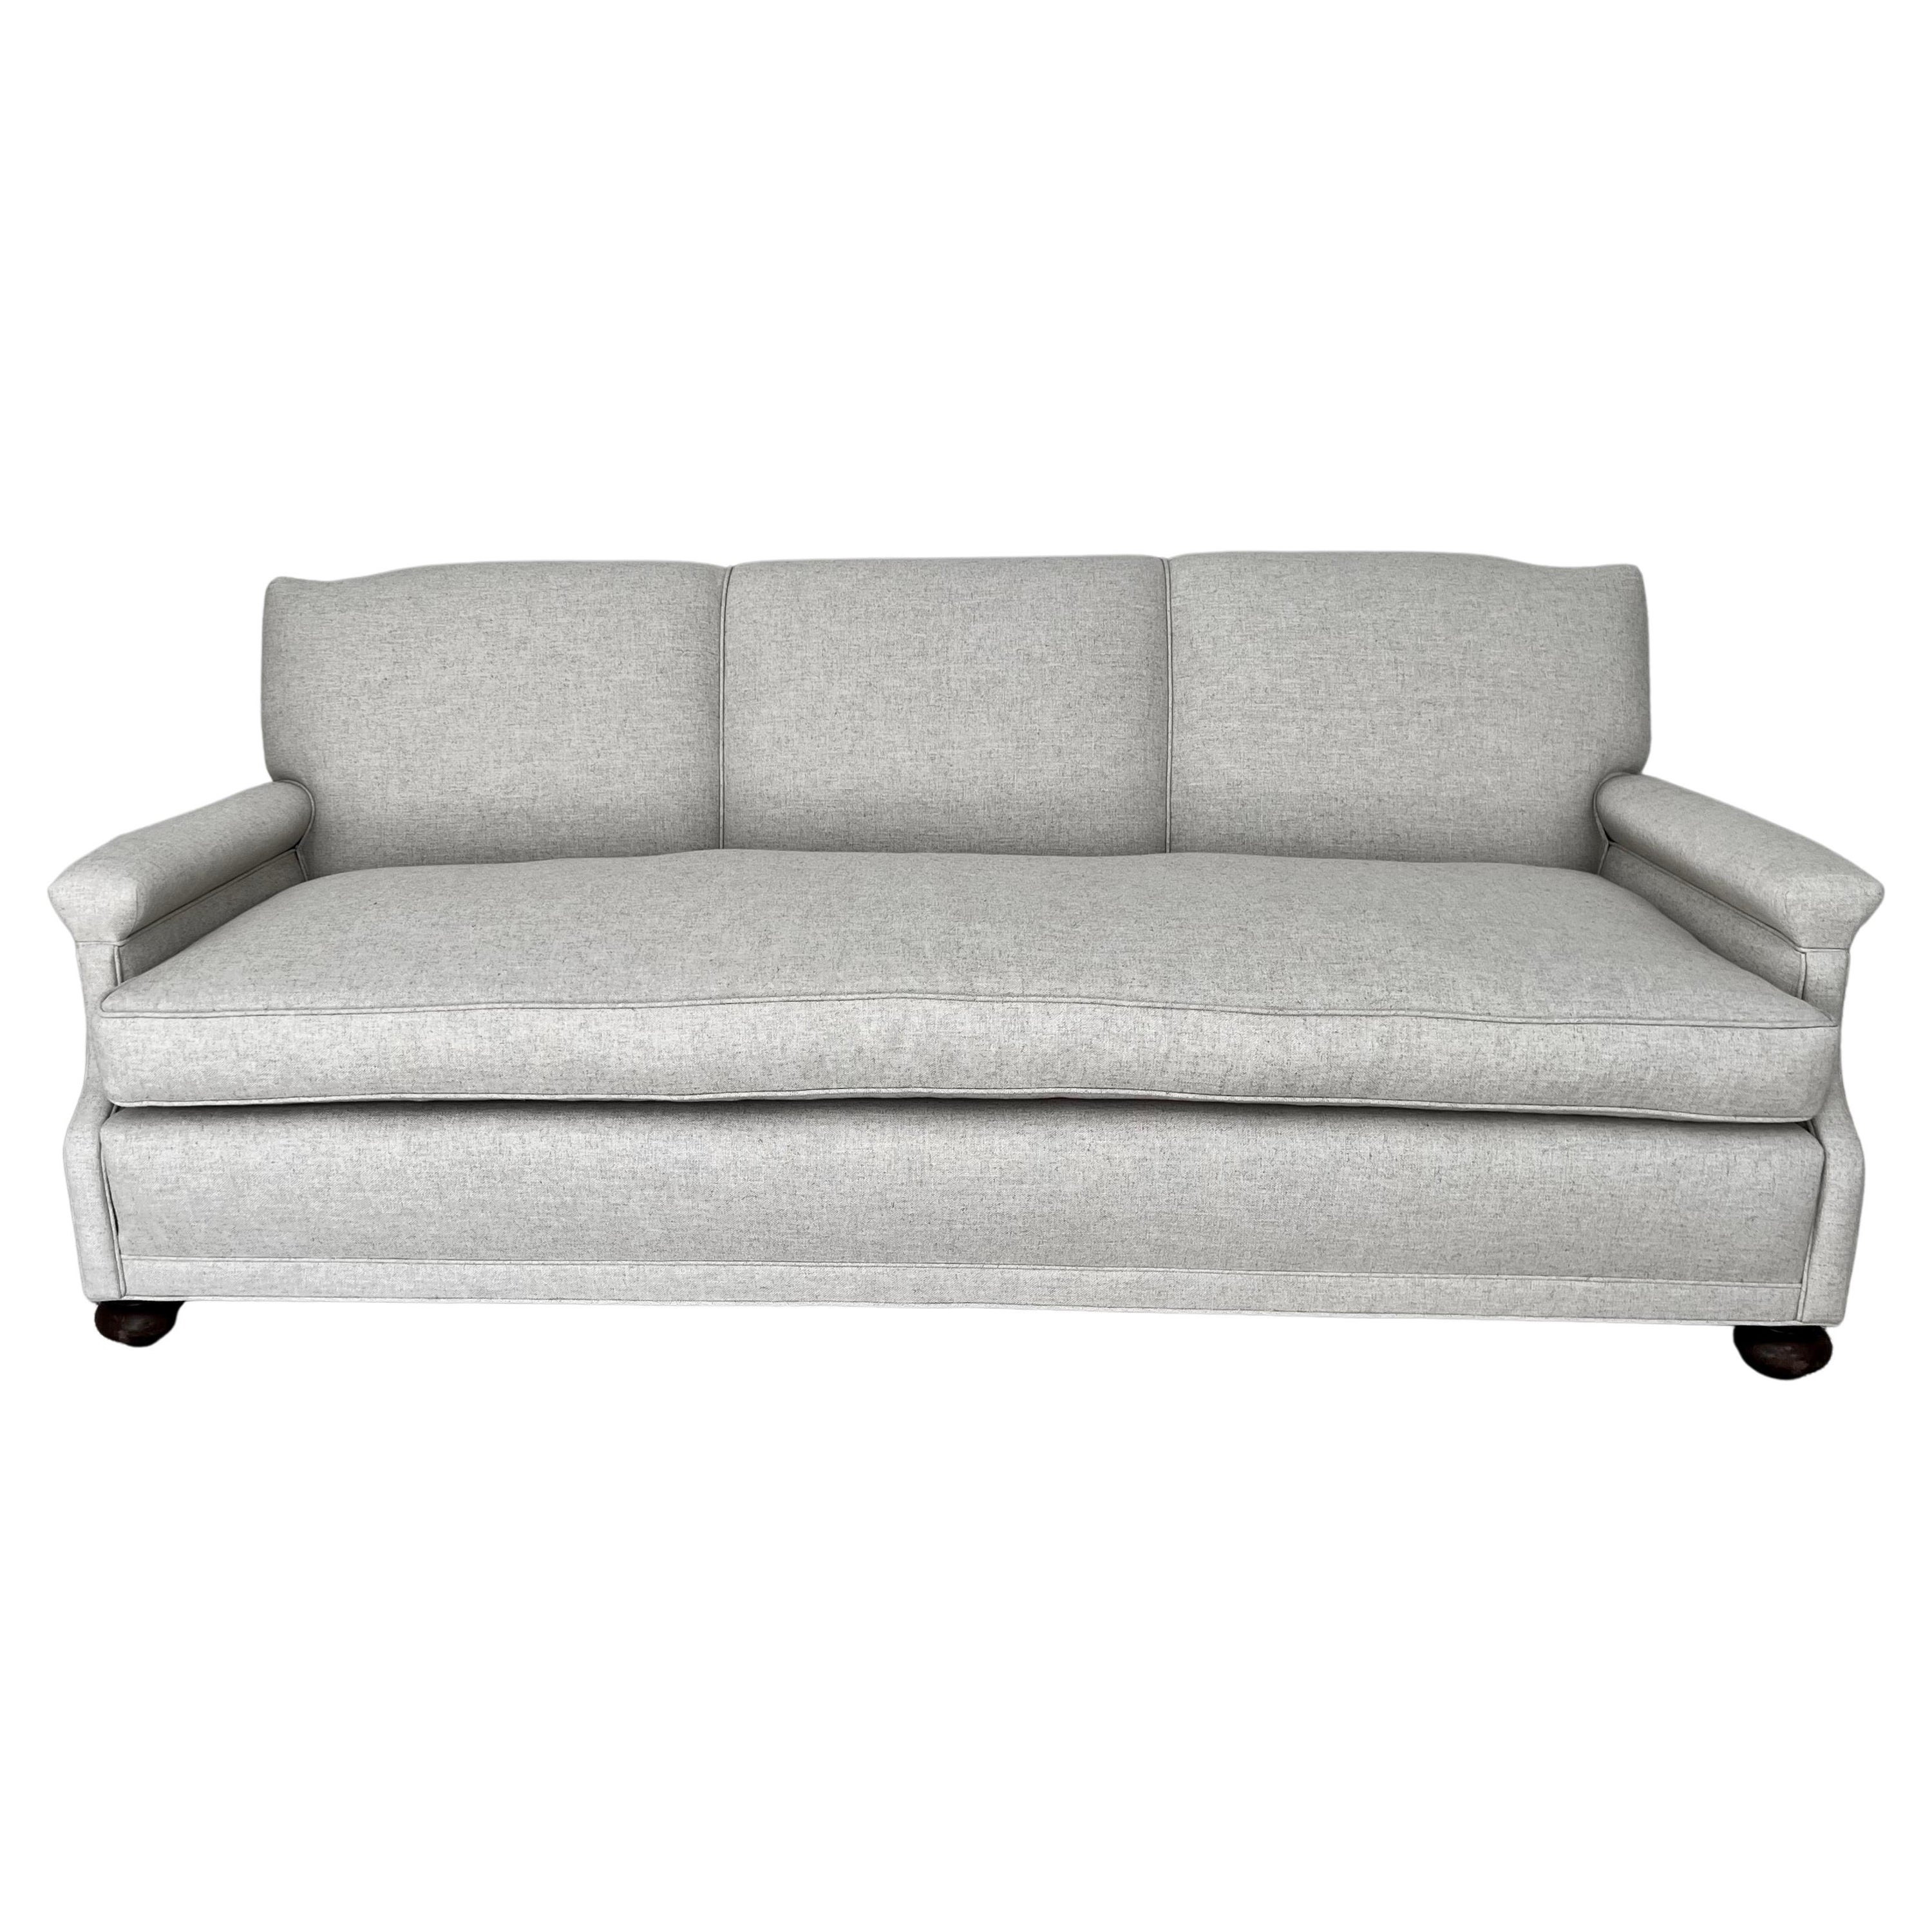 Sofa in Linen and Down Upholstery and Bun Feet For Sale